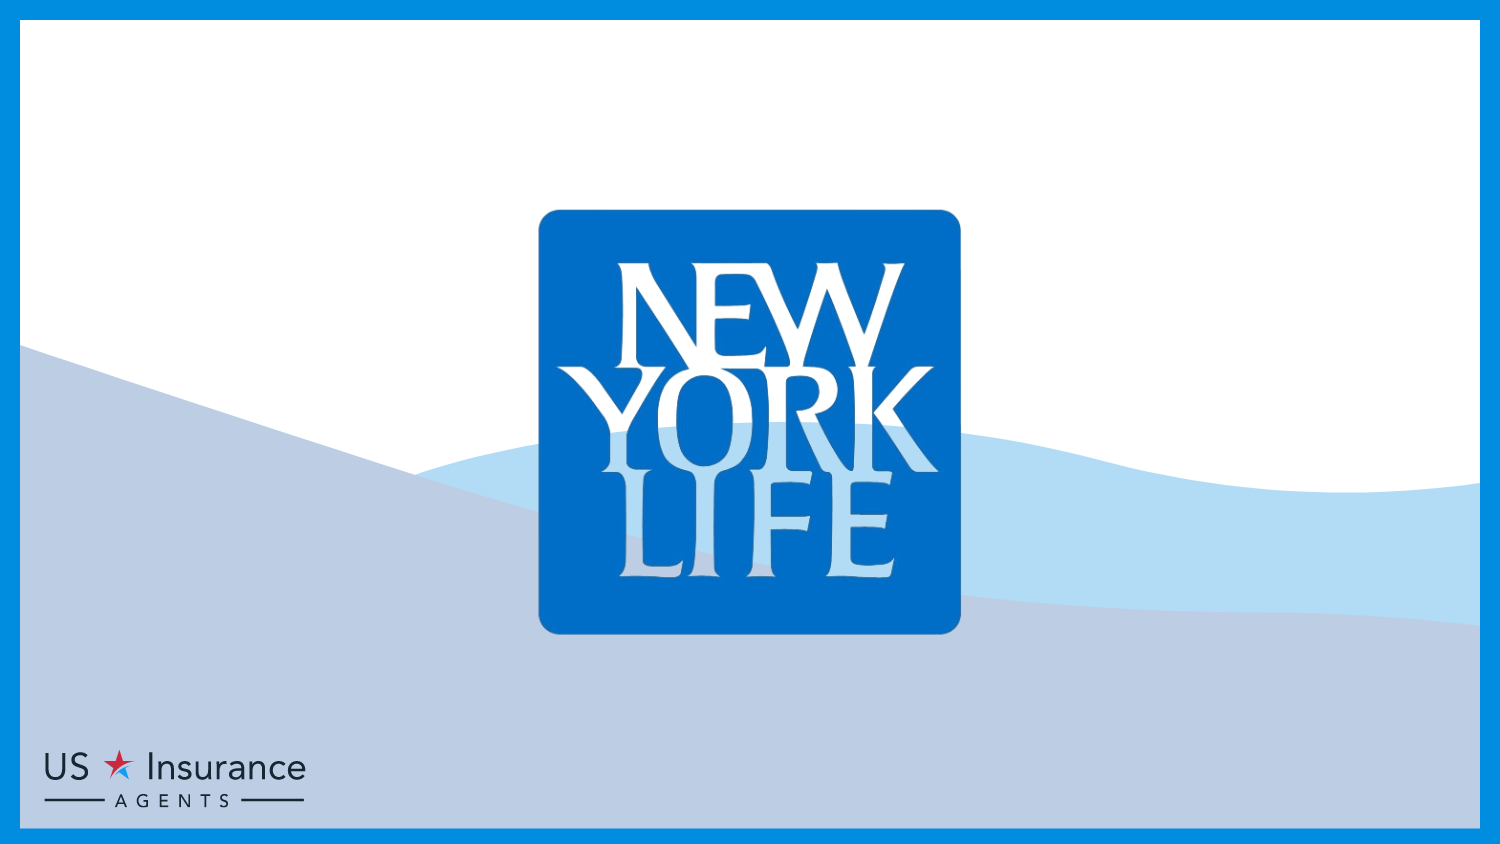 New York Life: Best Life Insurance for People With Down Syndrome